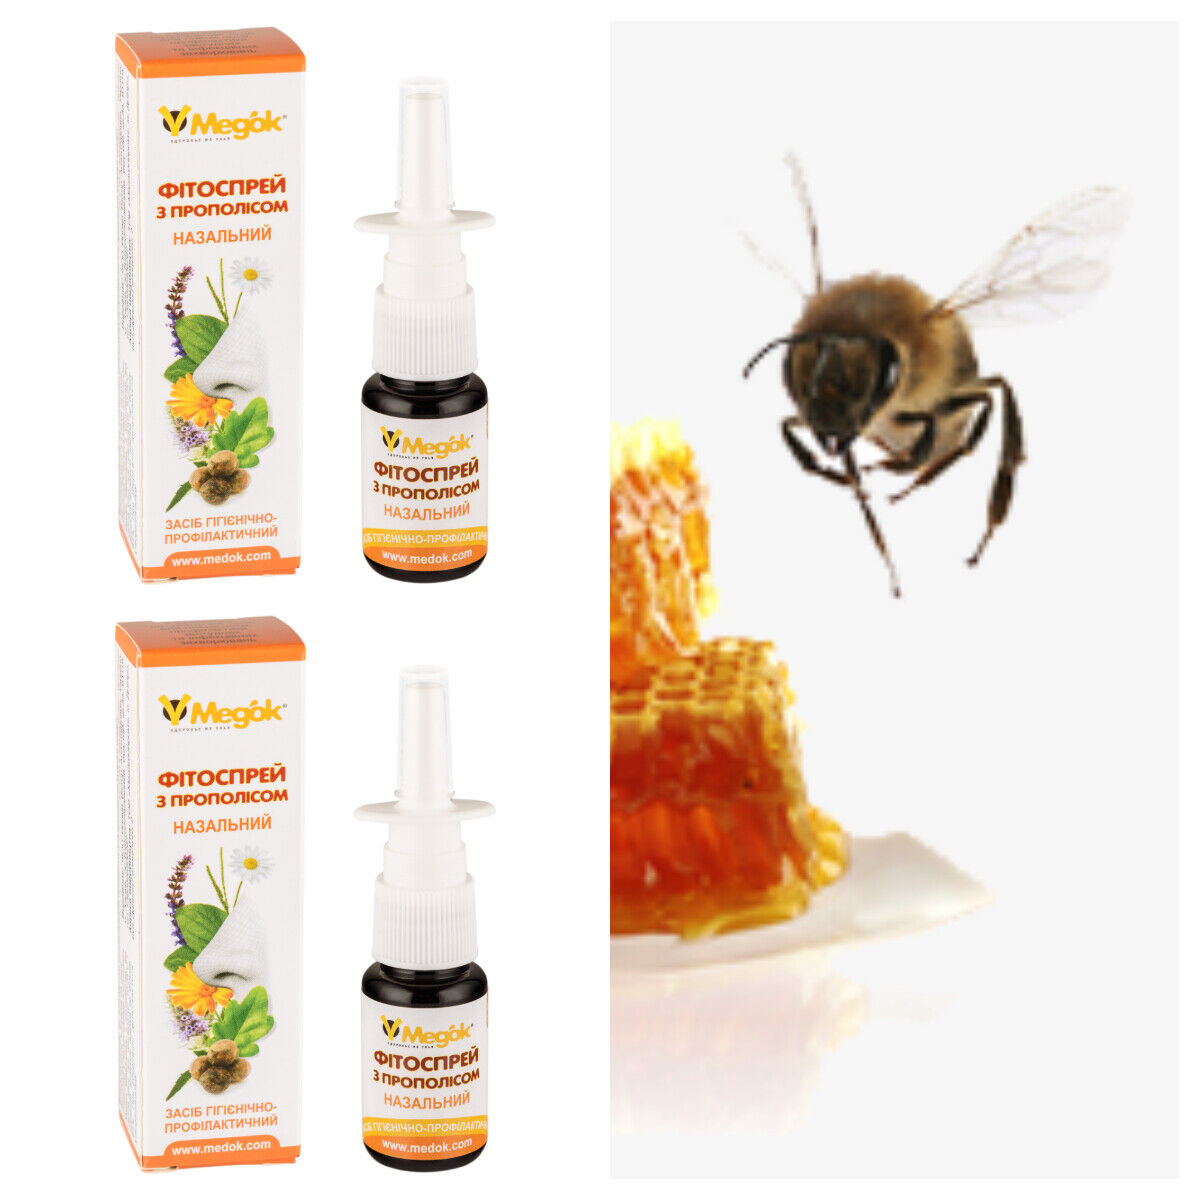 2 or 5  Nazal spray propolis 100% natural beekeeping product from Ukraine